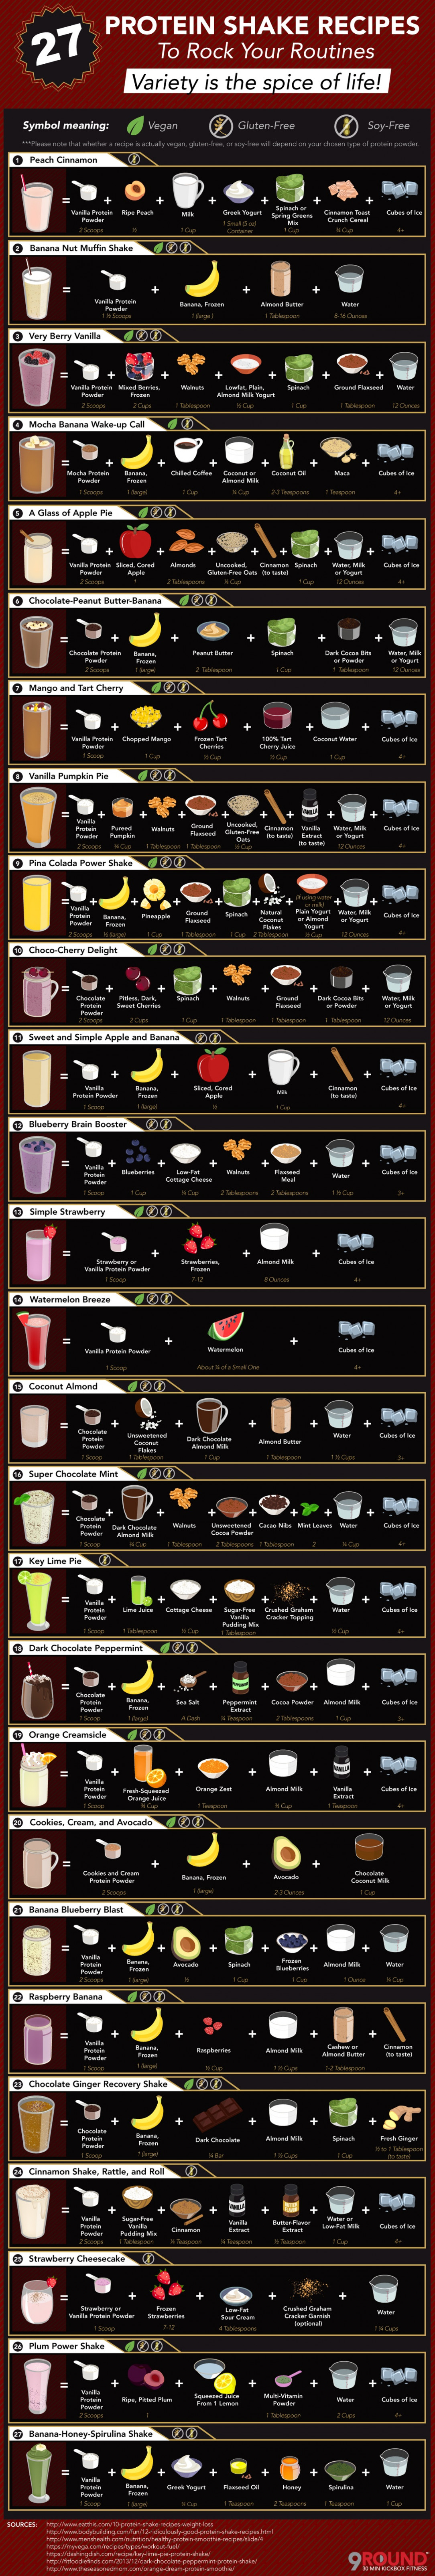 A guide to a variety of protein smoothies